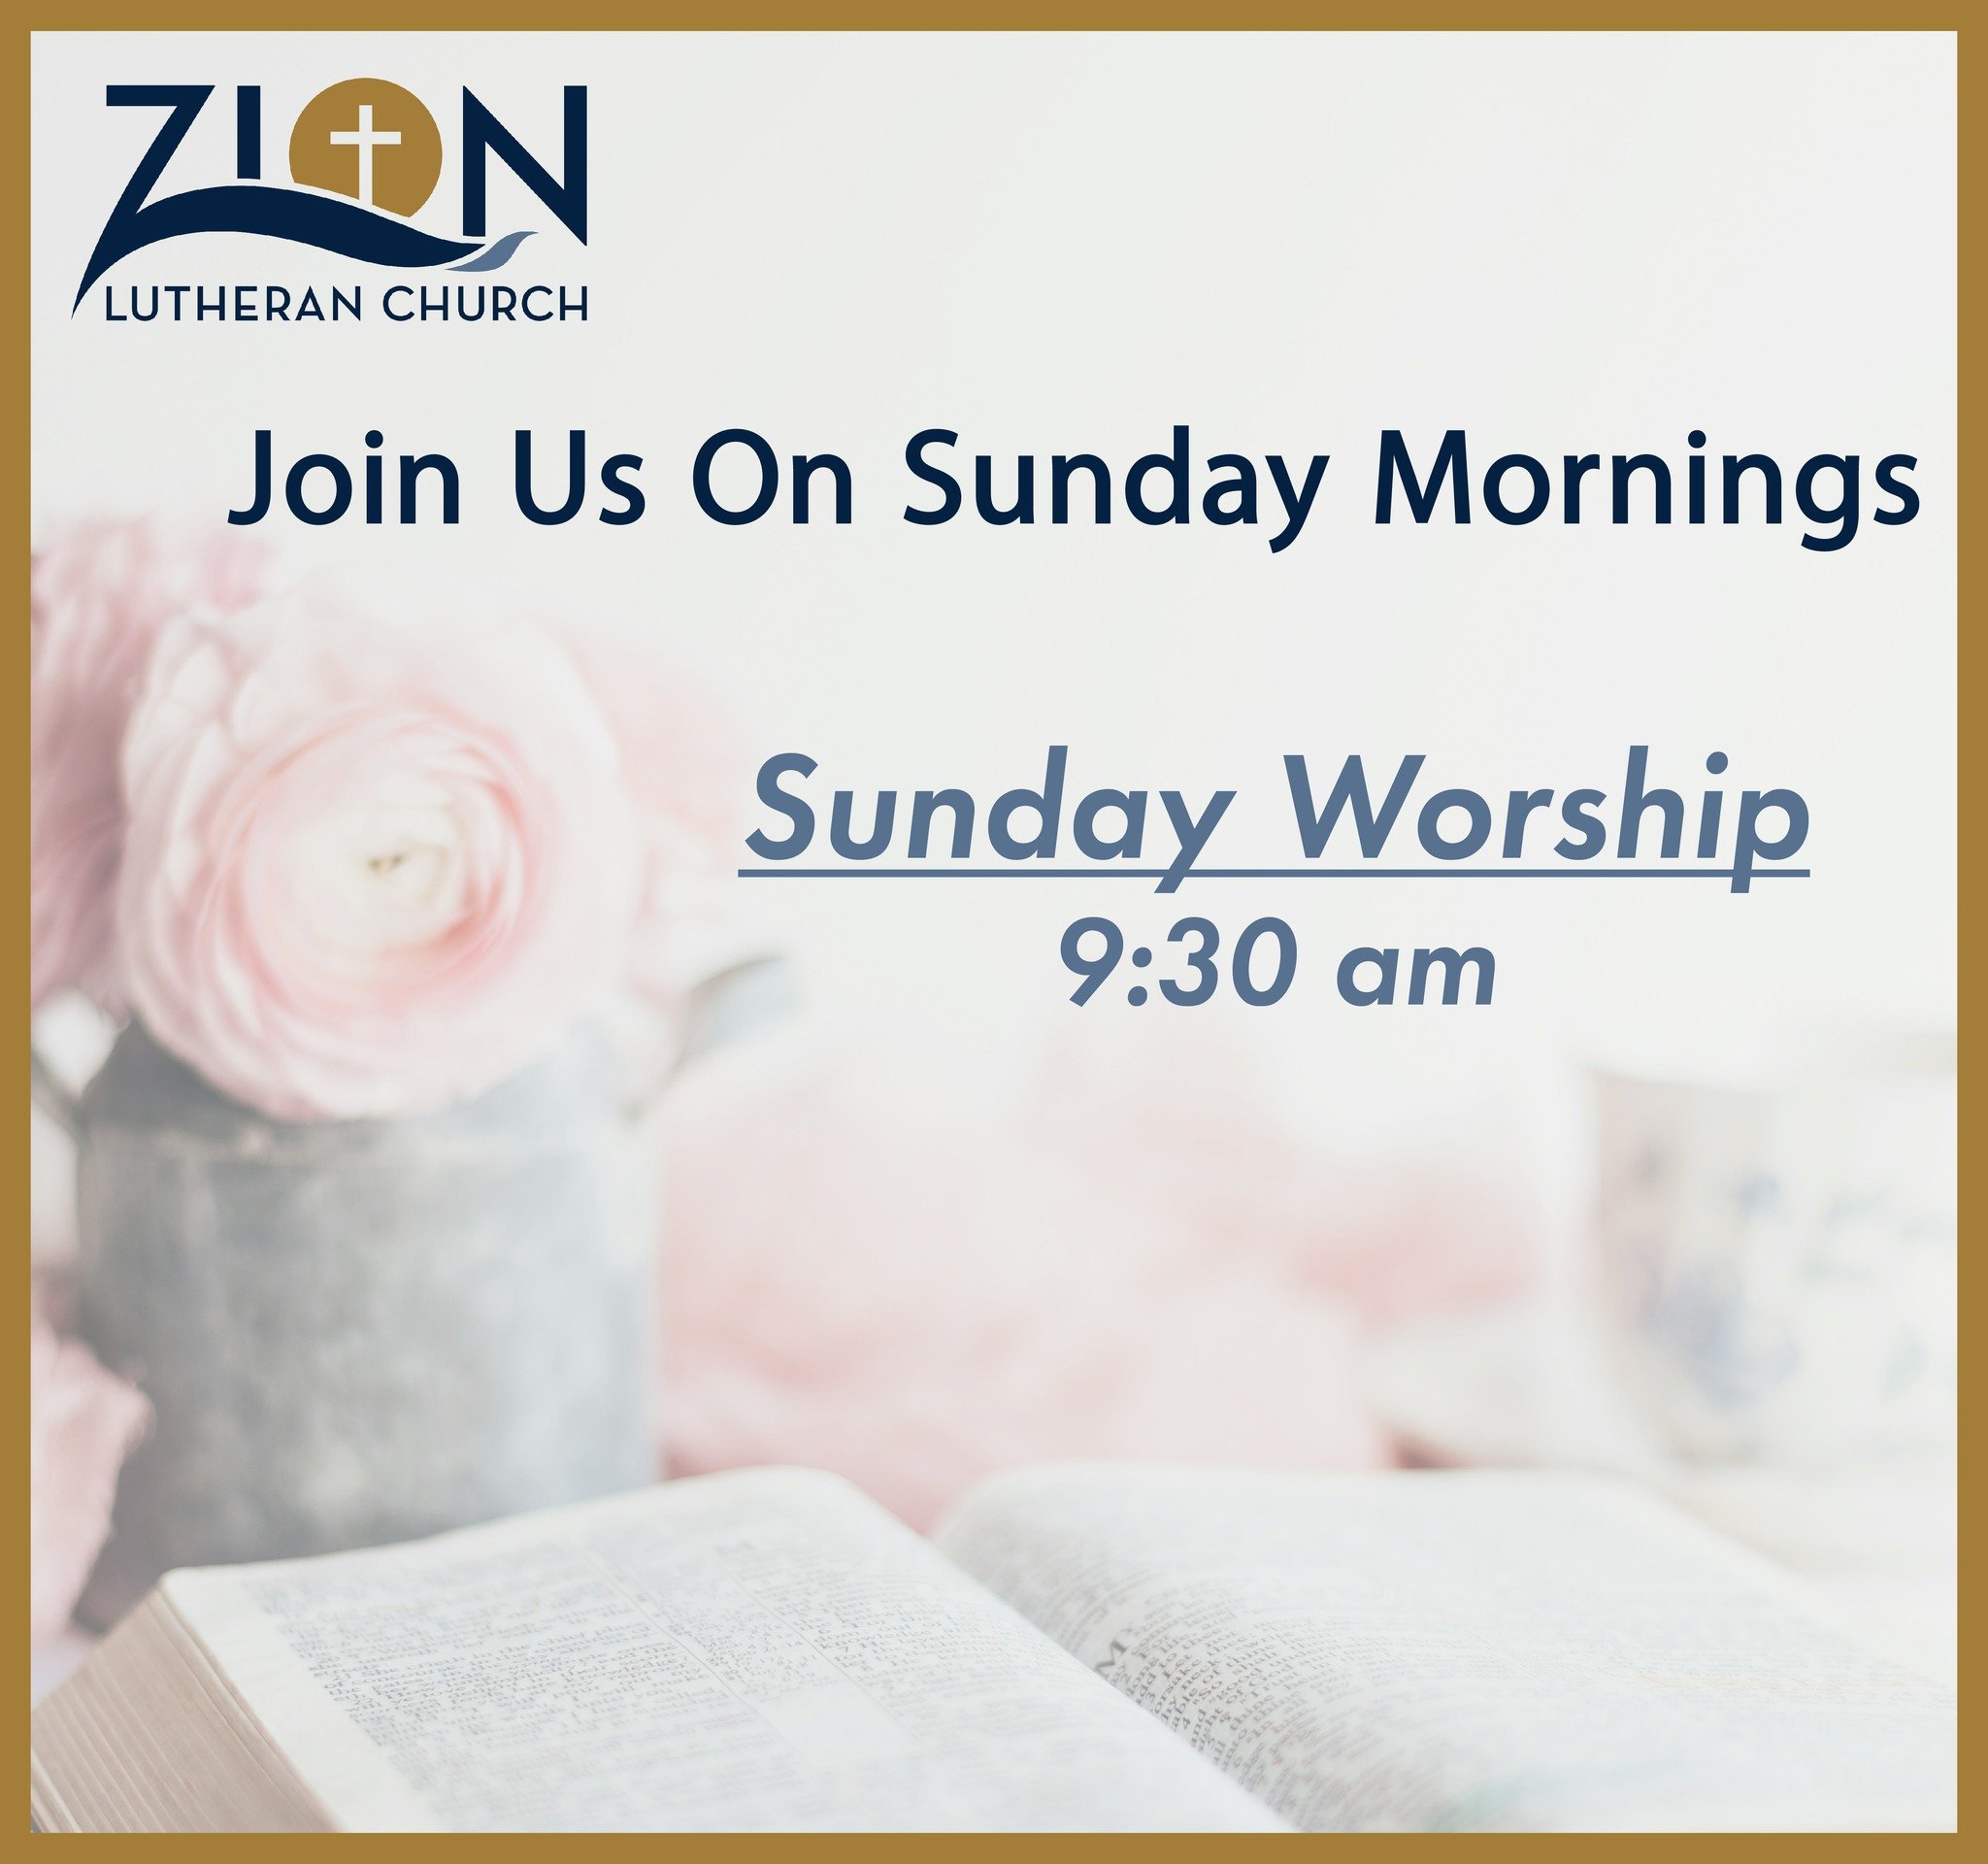 ✨Join our Sunday Worship at 9:30 am. Be greeted with open arms🤗 and a community of God's love 💛💙

Visit our website to learn more about what we have to offer: 
https://zionlutheran-ic.org/
~
~
 #HawkeyeNation #universitylife #iowa #lutheranchurch 